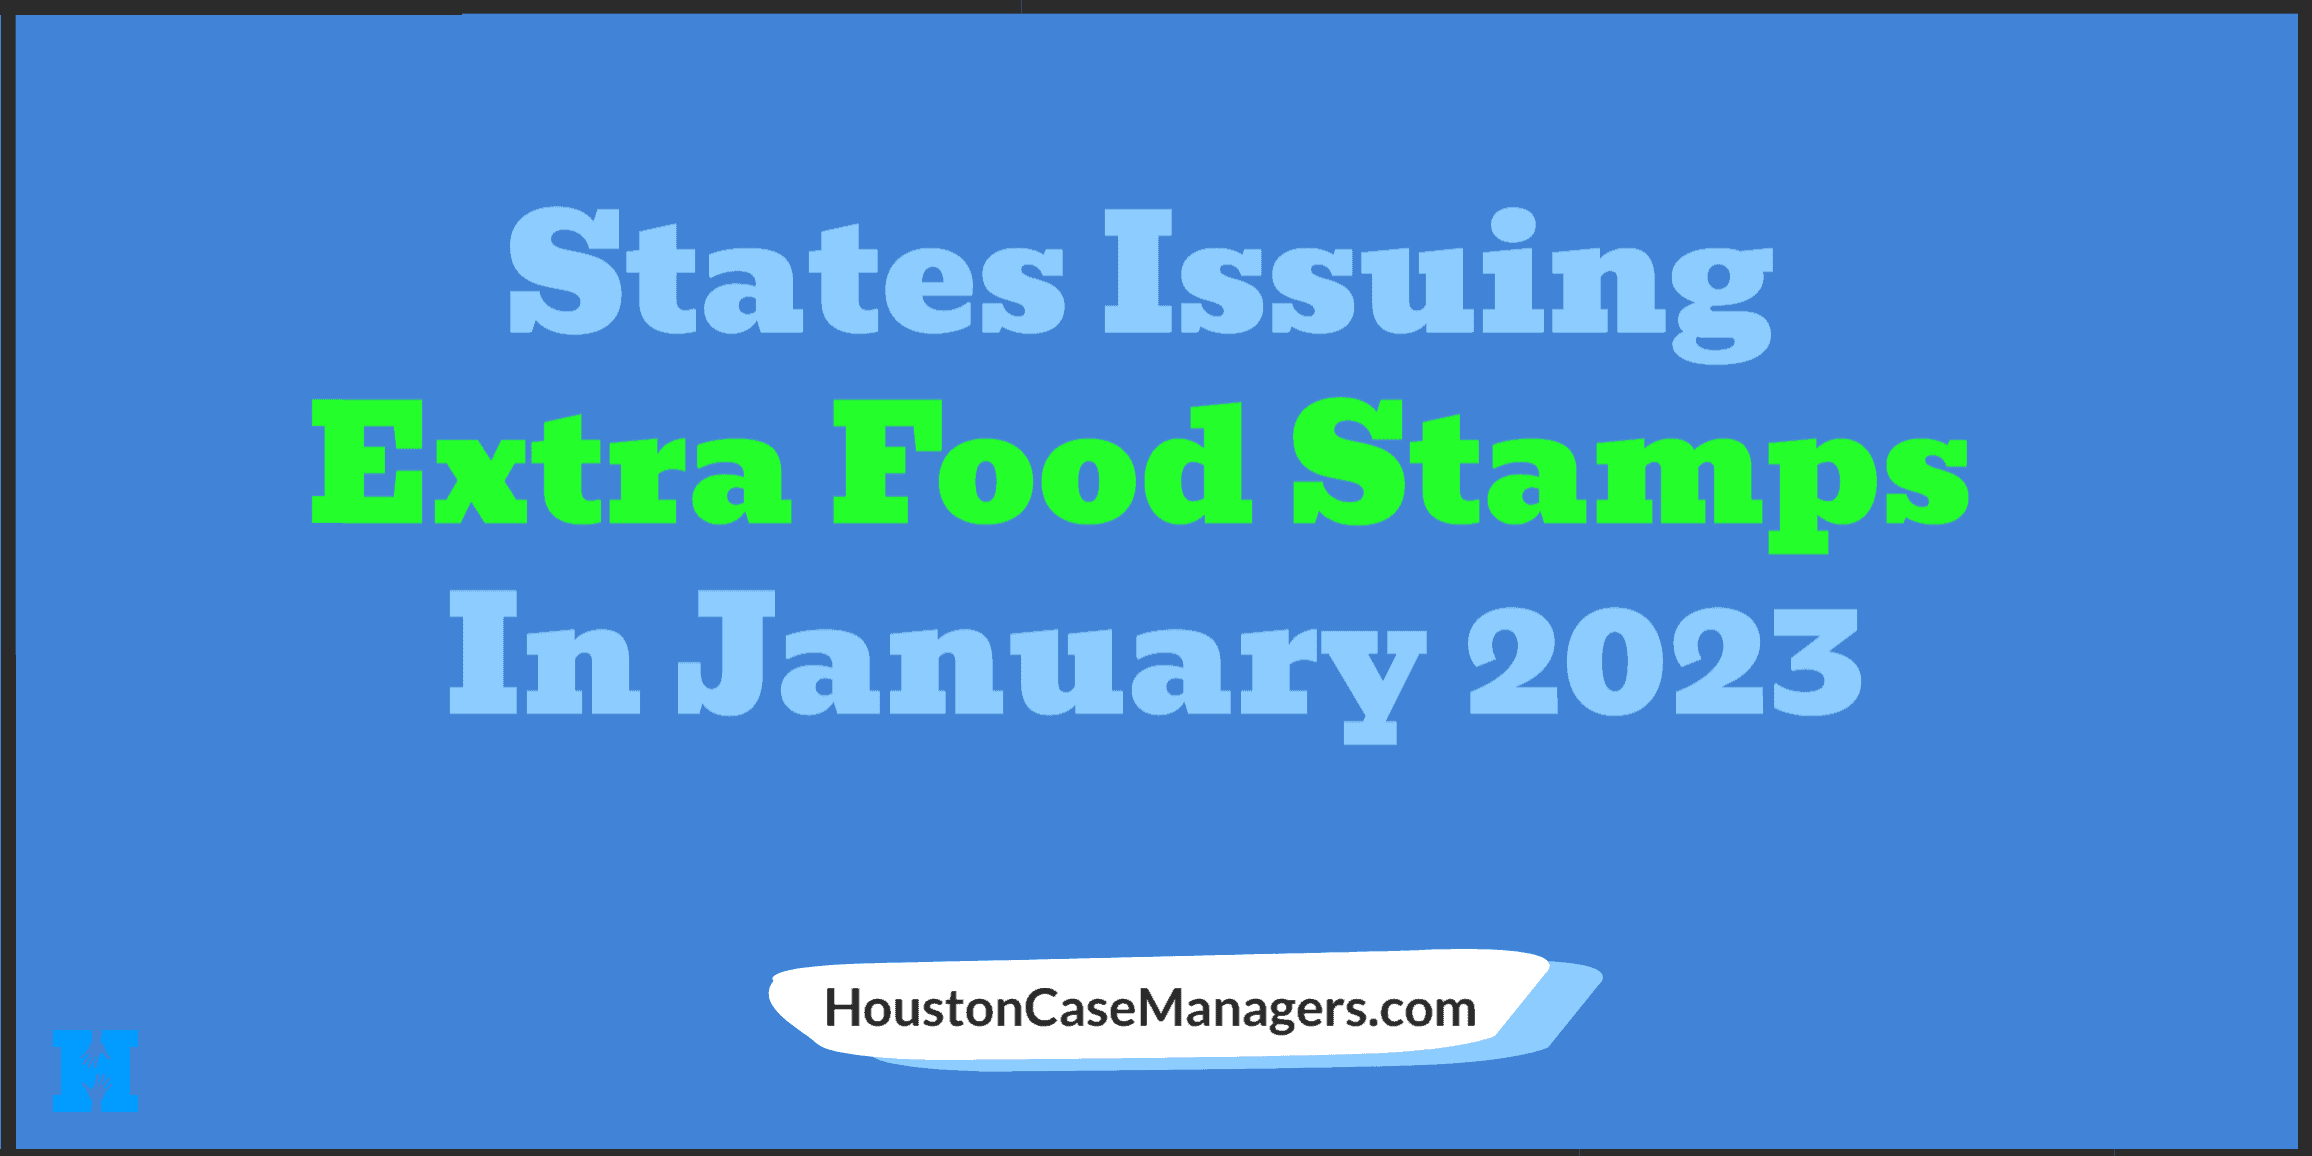 33 States Issuing Extra Food Stamps In January 2023